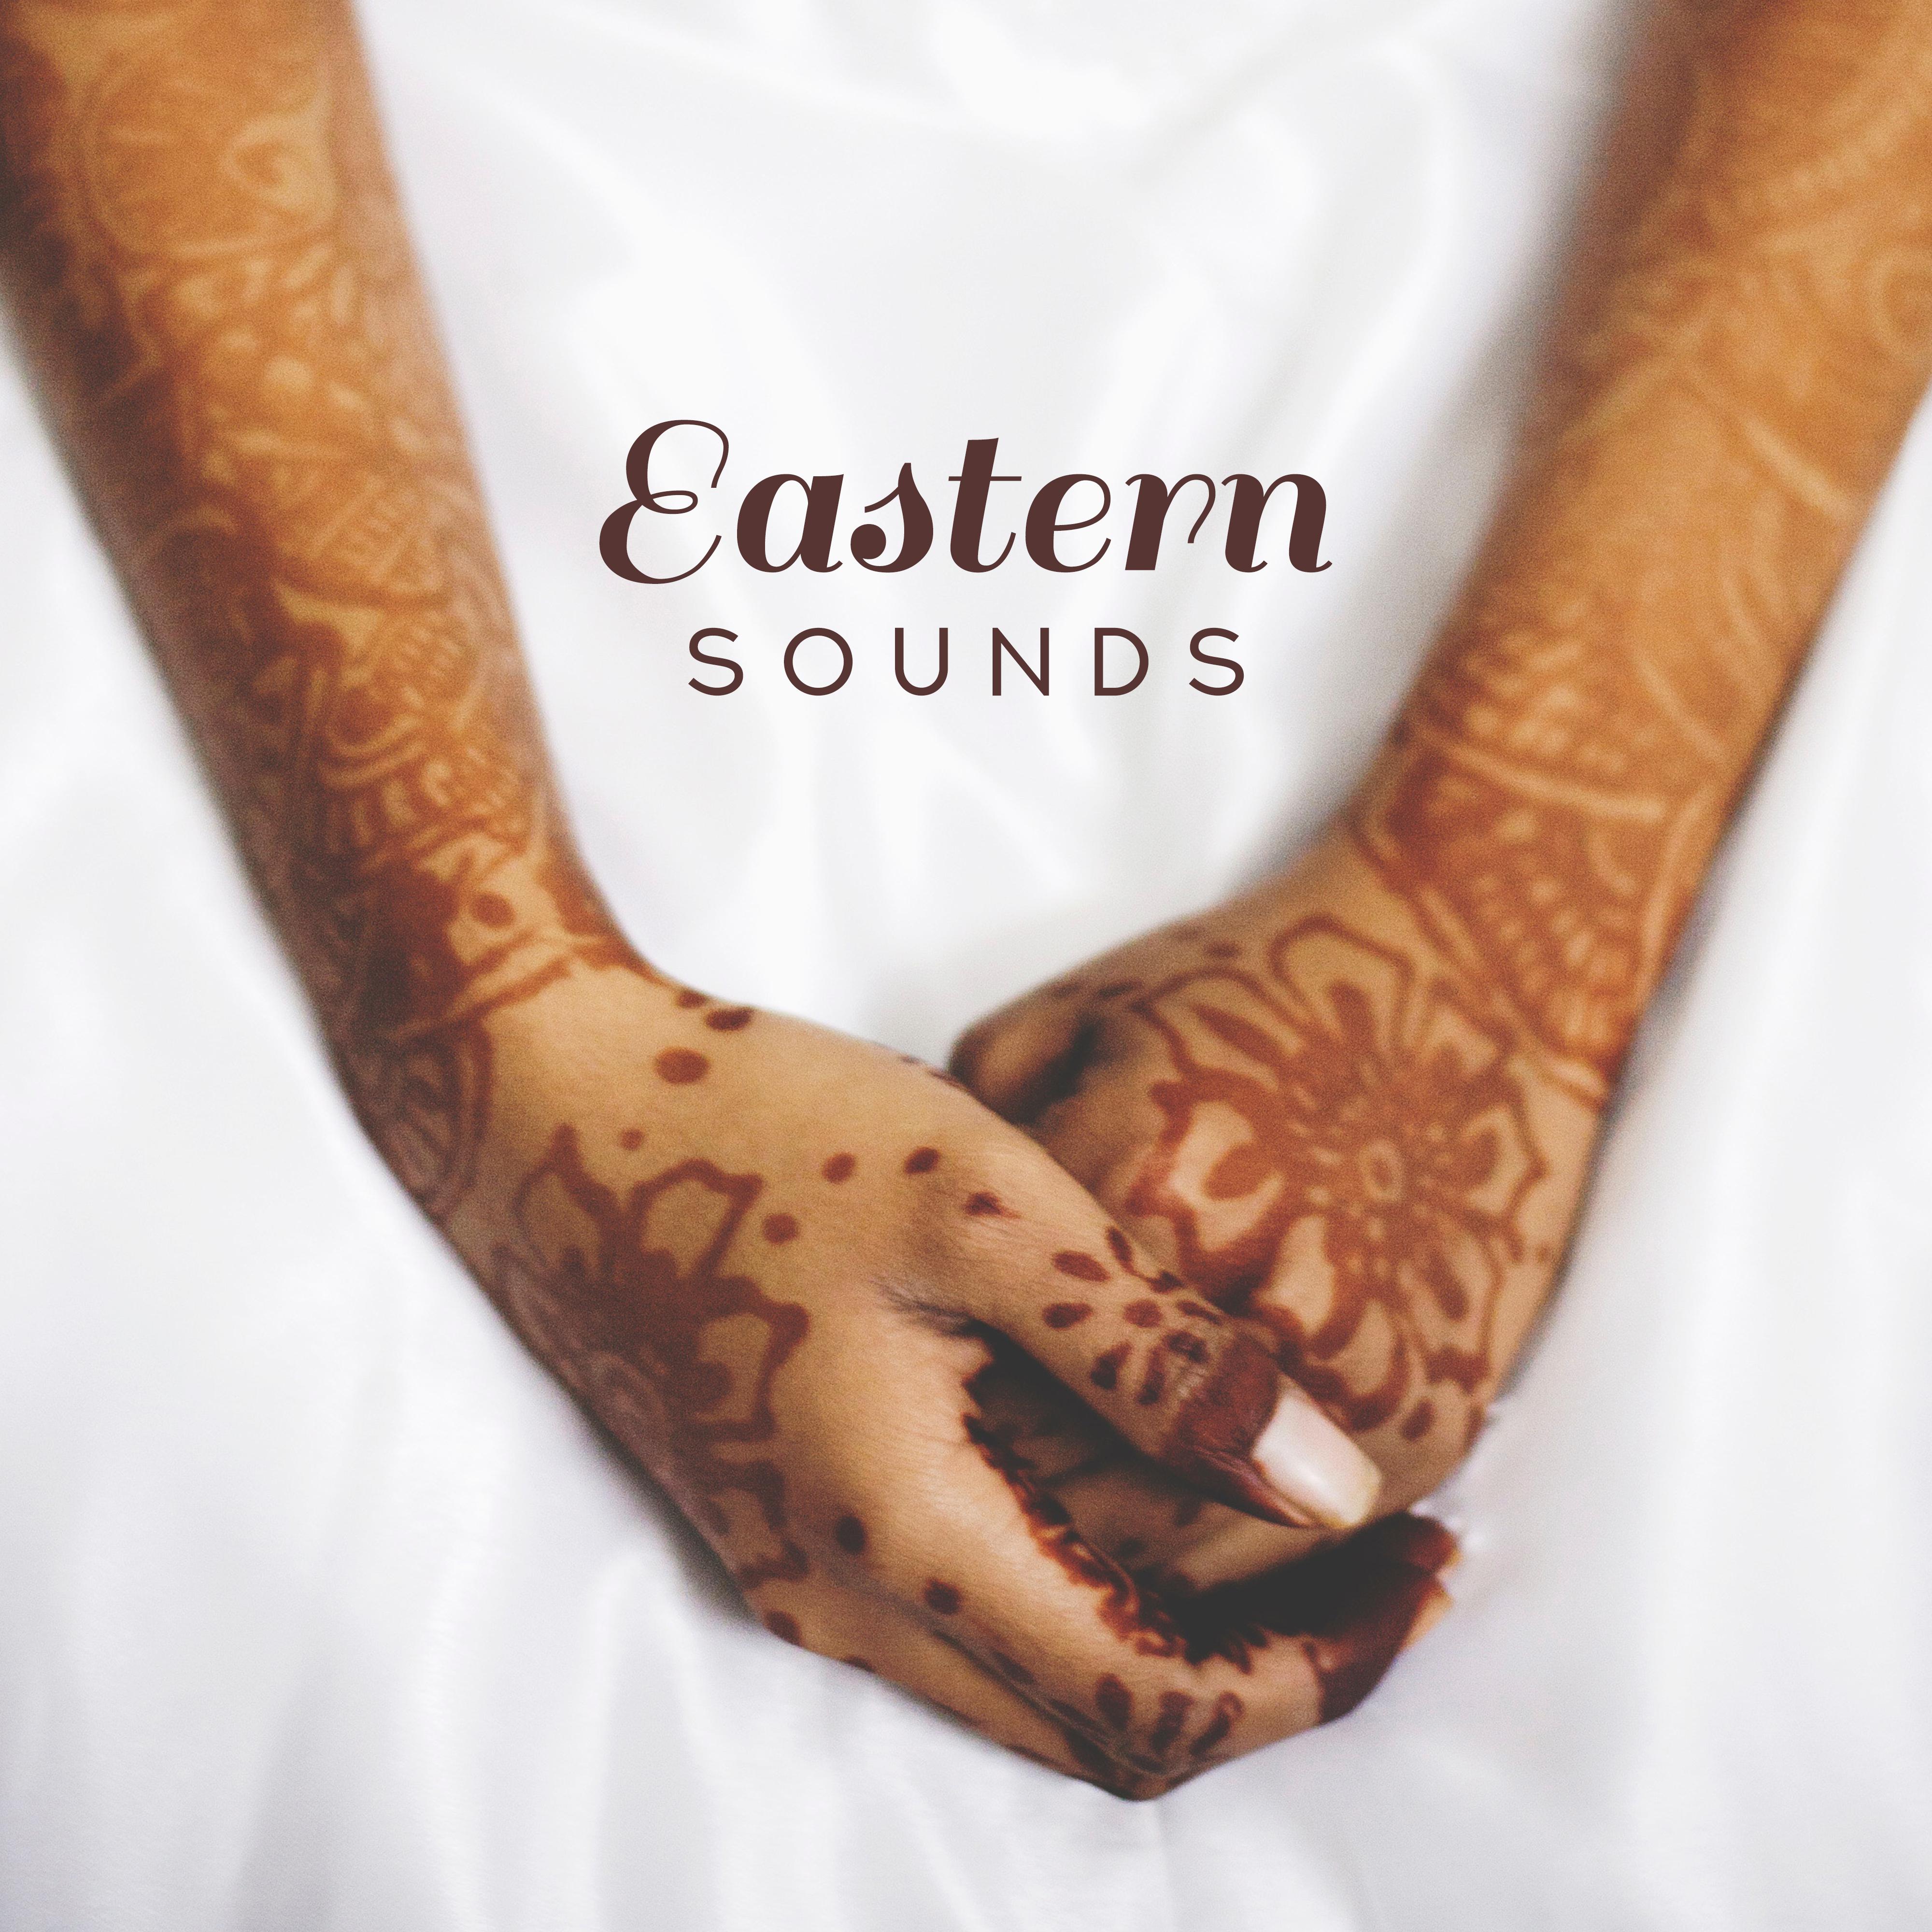 Eastern Sounds - Chillout Music with an Oriental Character